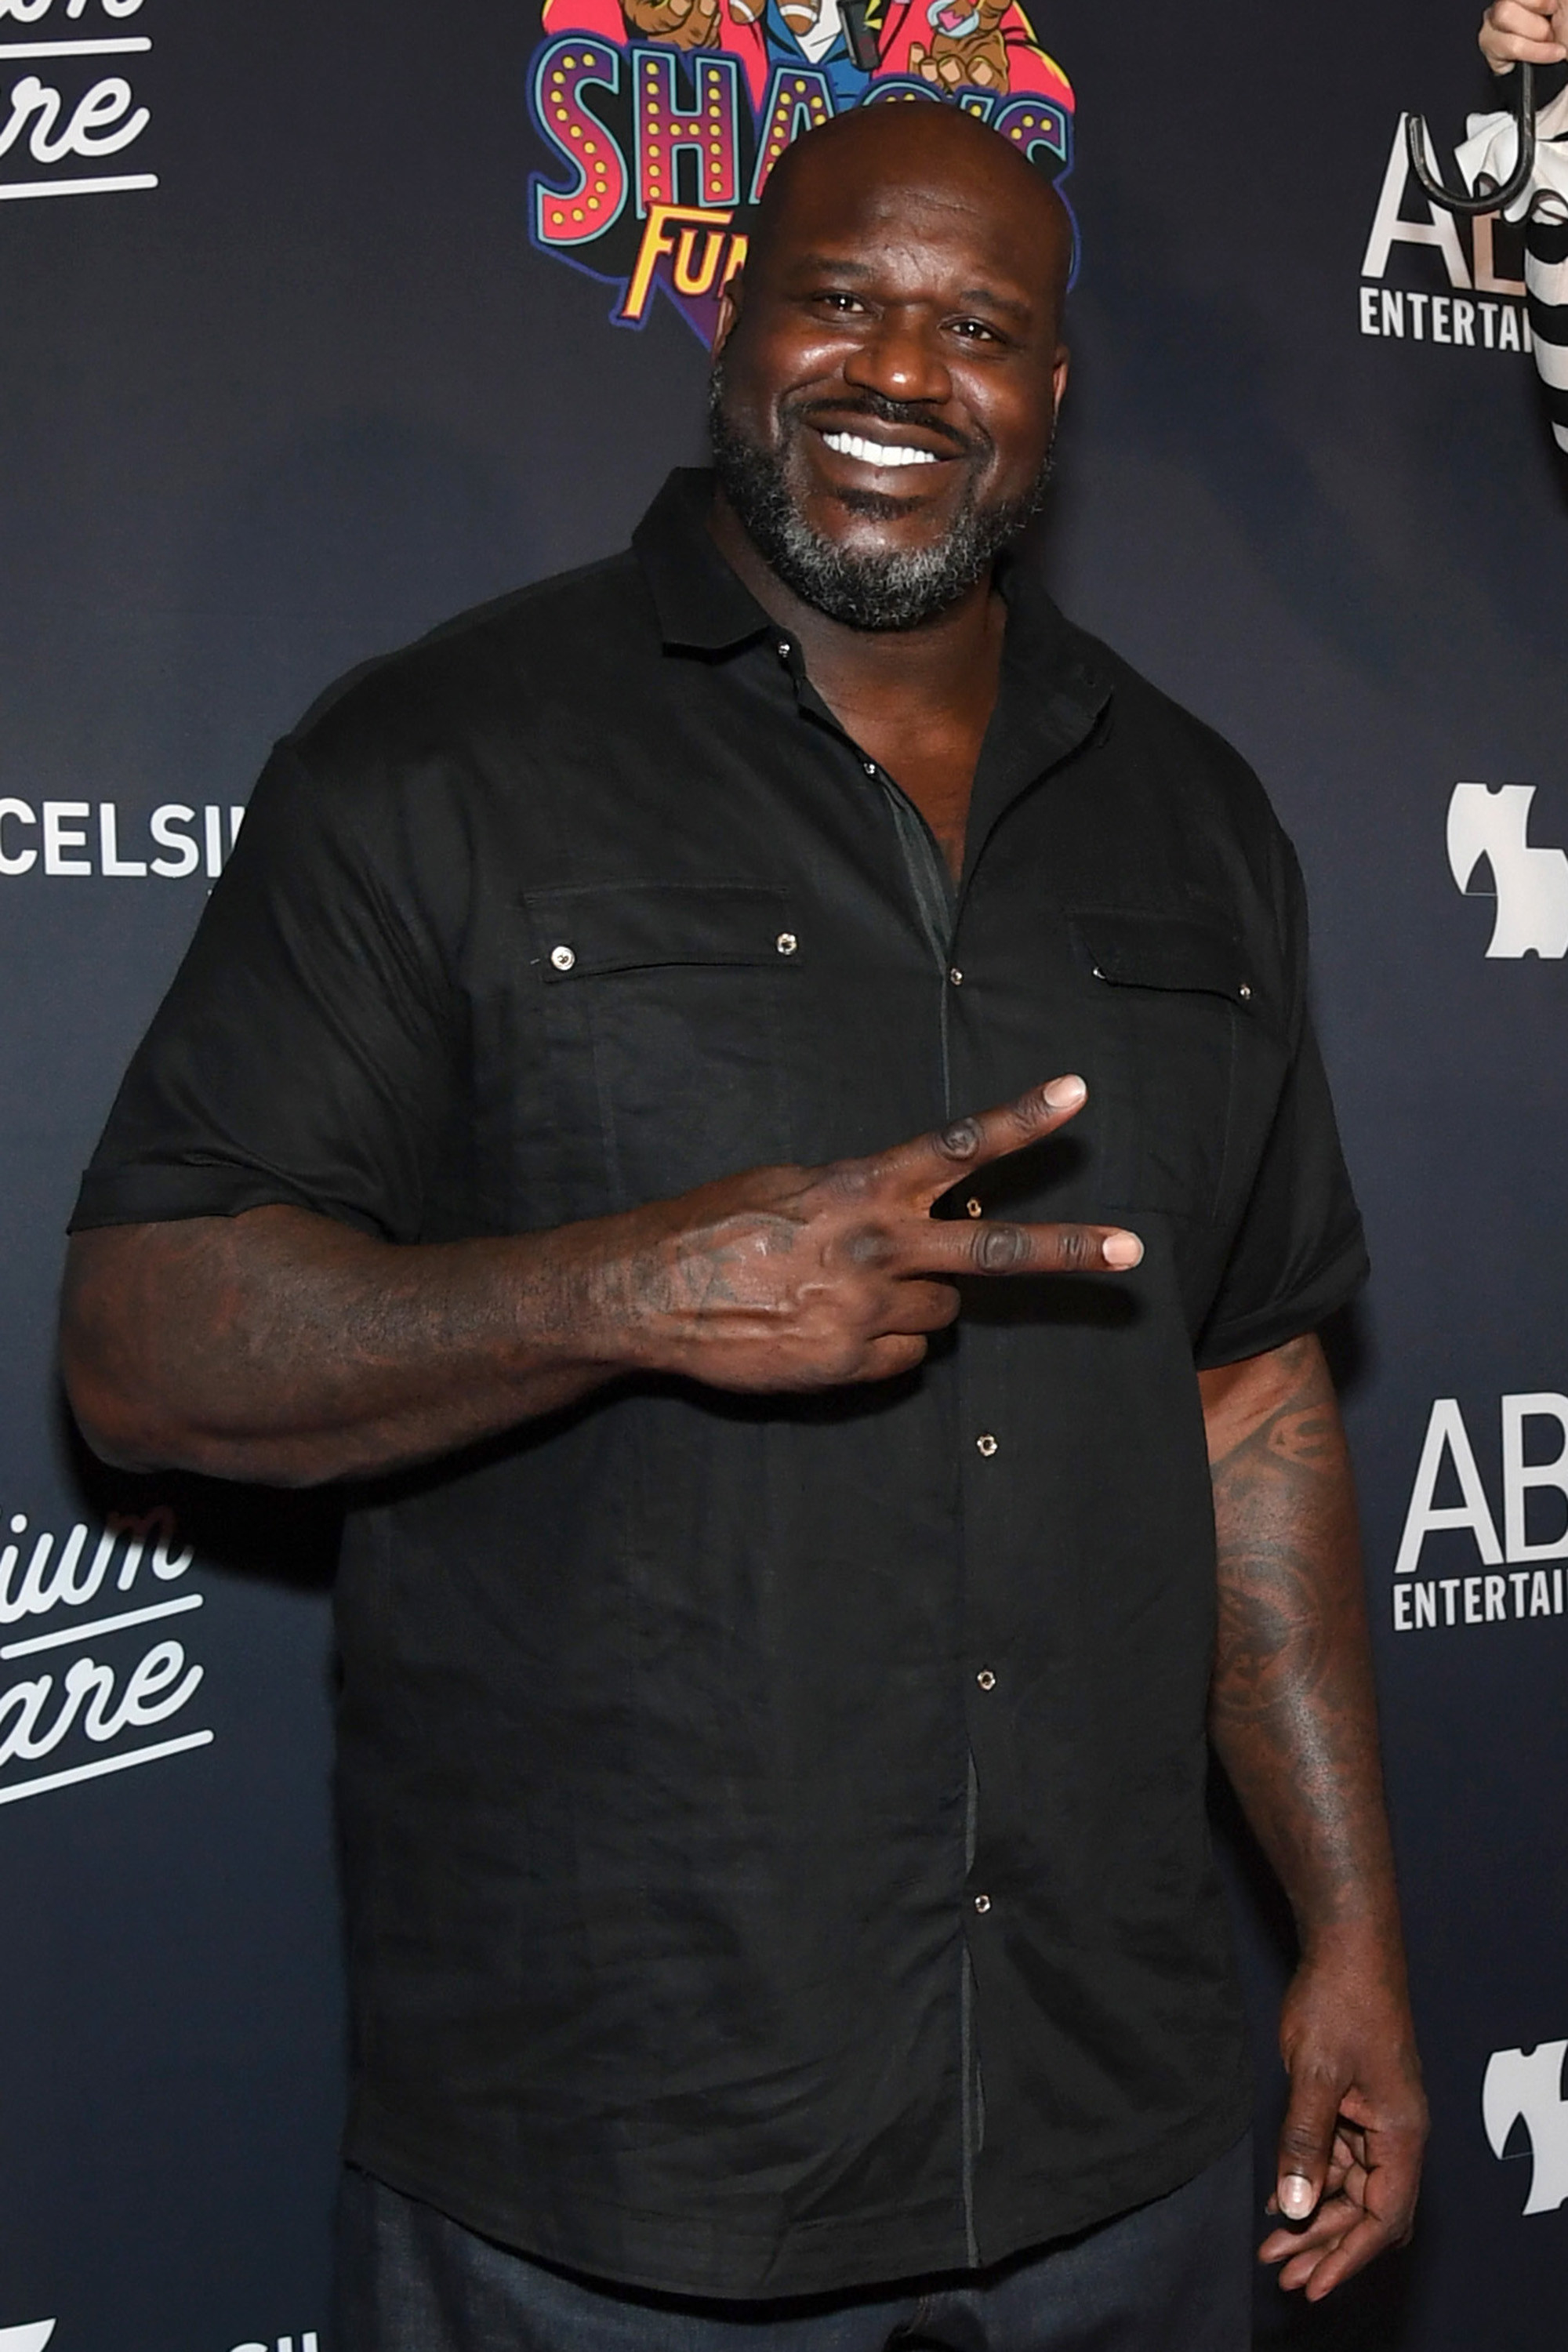 Shaq throwing a peace sign